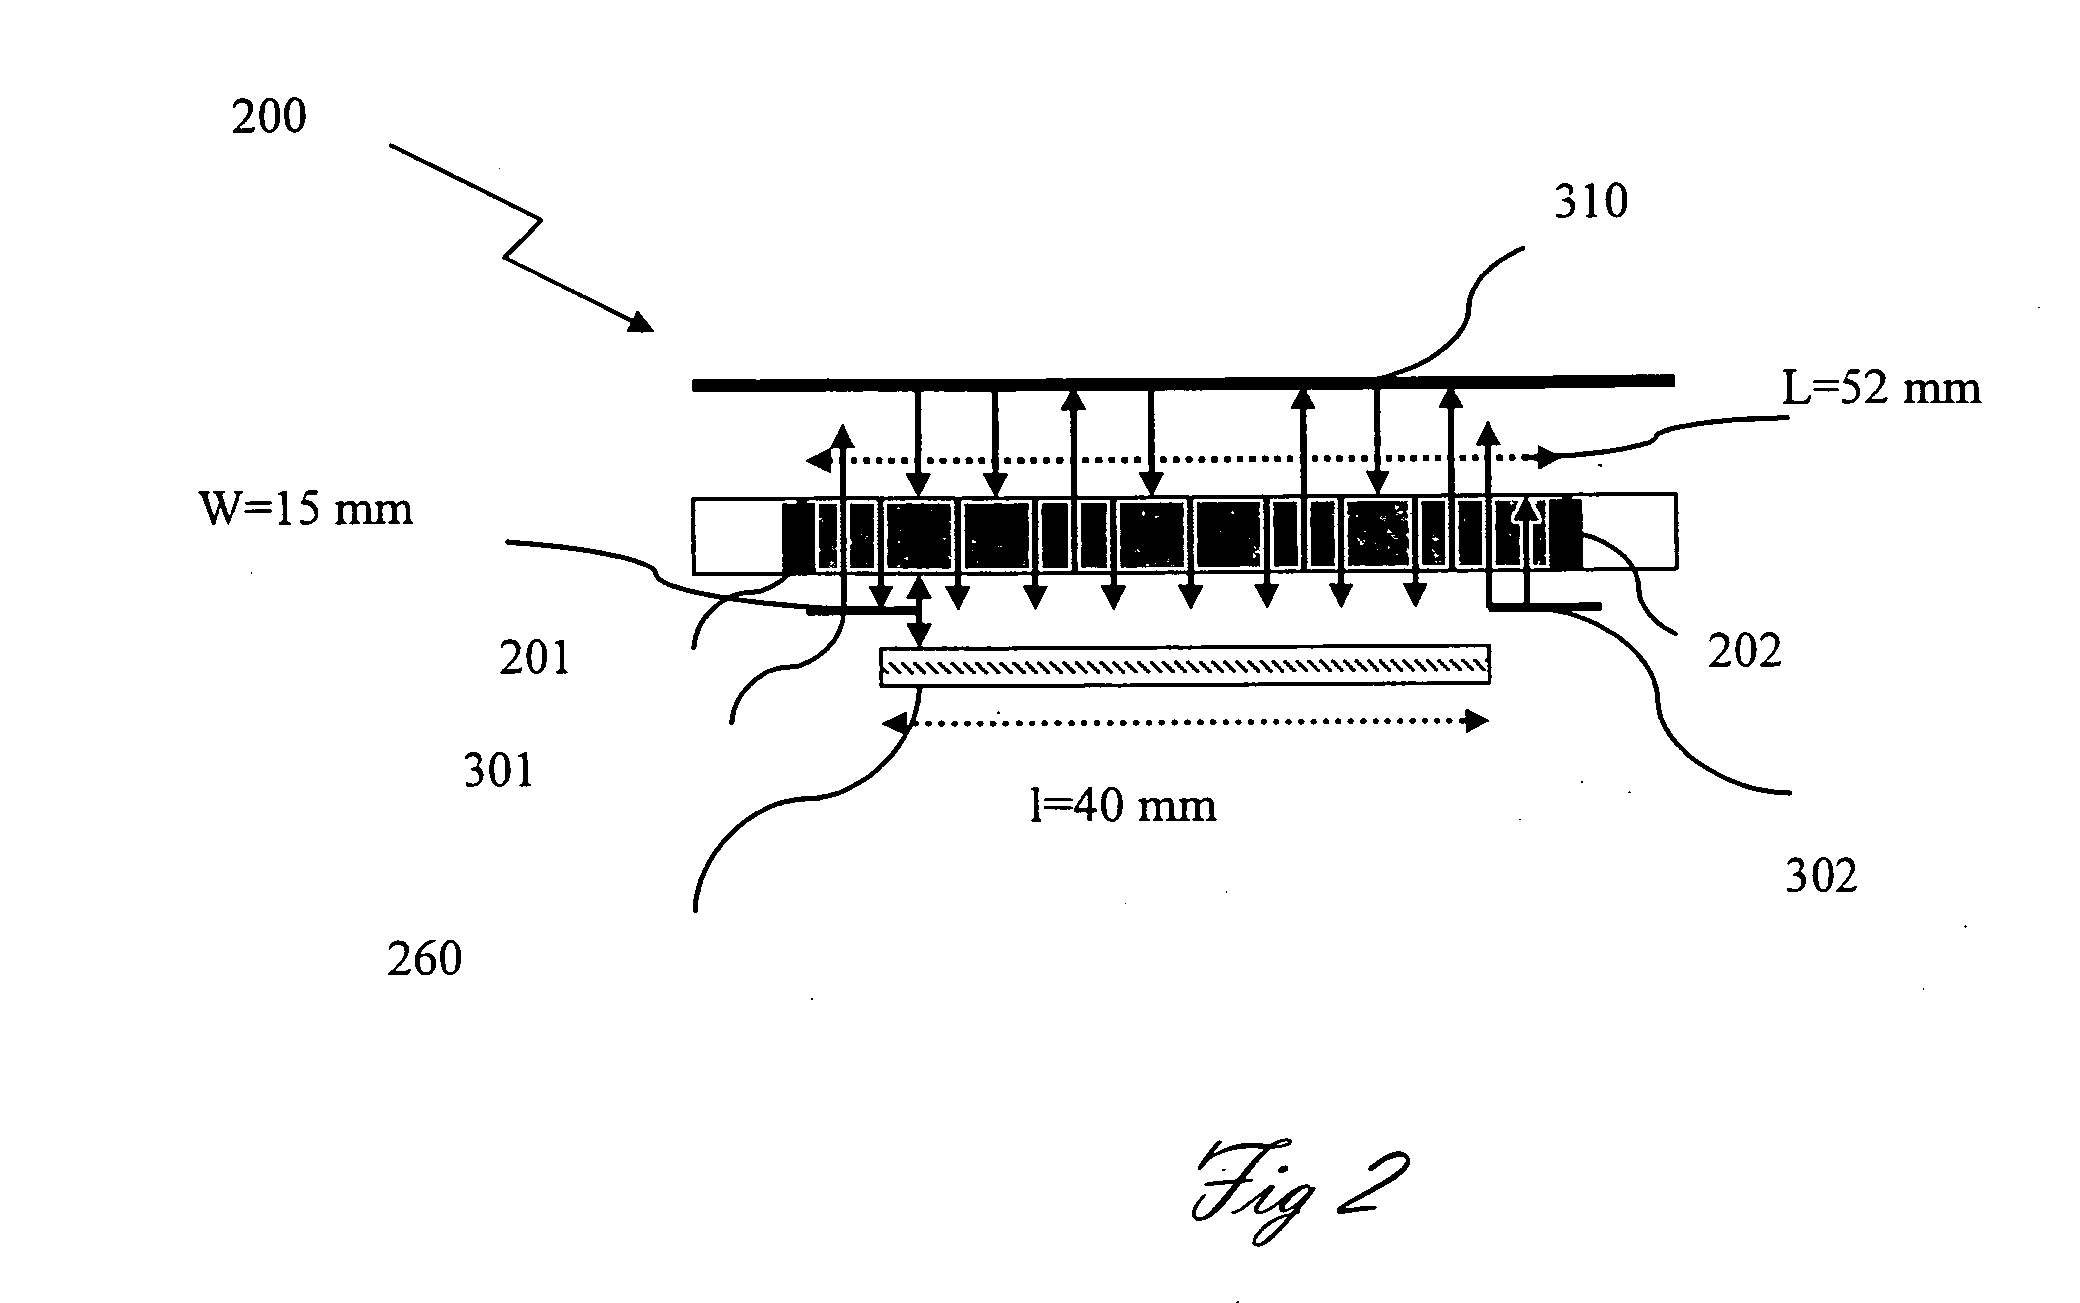 Multi-broadband pulse emitter and a method for applying an effective dermal treatment